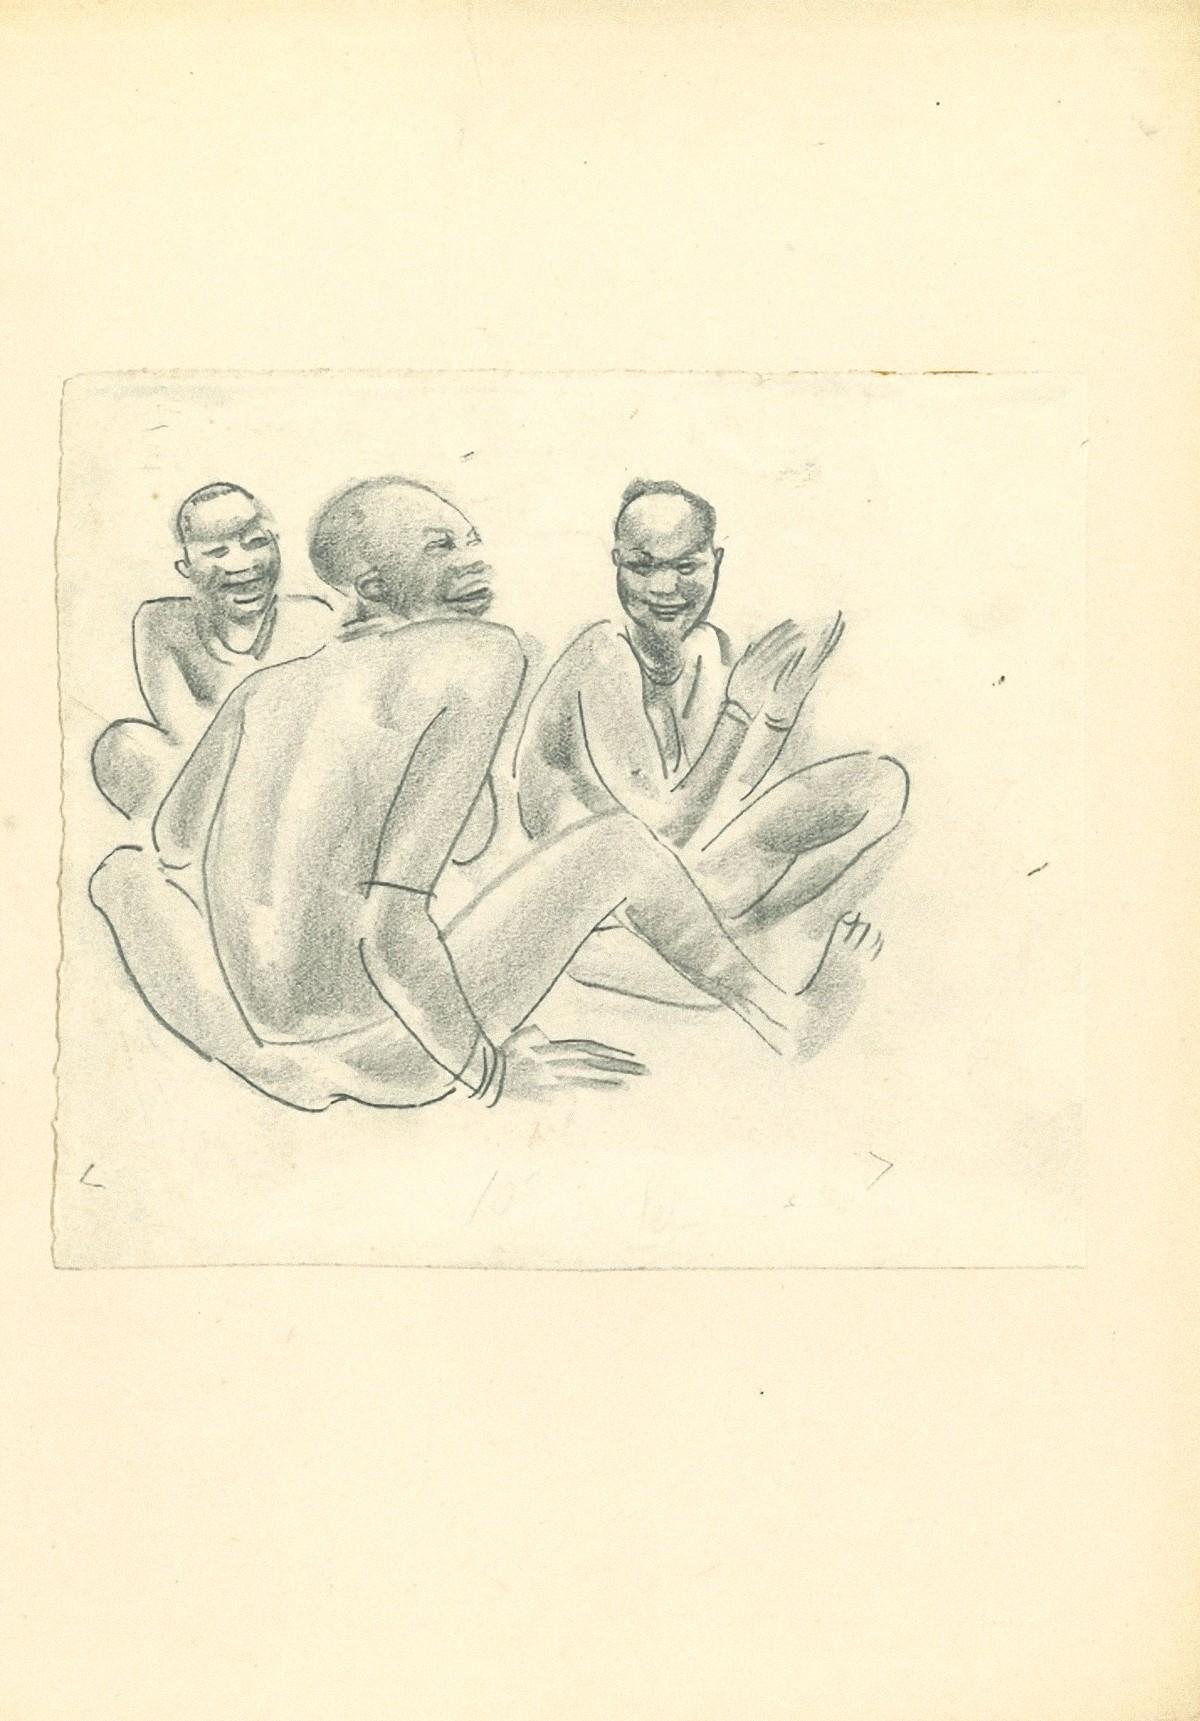 Africa - Women in Conversation is an original artwork realized by Emmanuel Gondouin (Versailles, 1883 - Parigi, 1934) in 1930s.

Origina Lithograph,  part of a collection entitled "Africa".

The work is glued to a cardboard.

Good